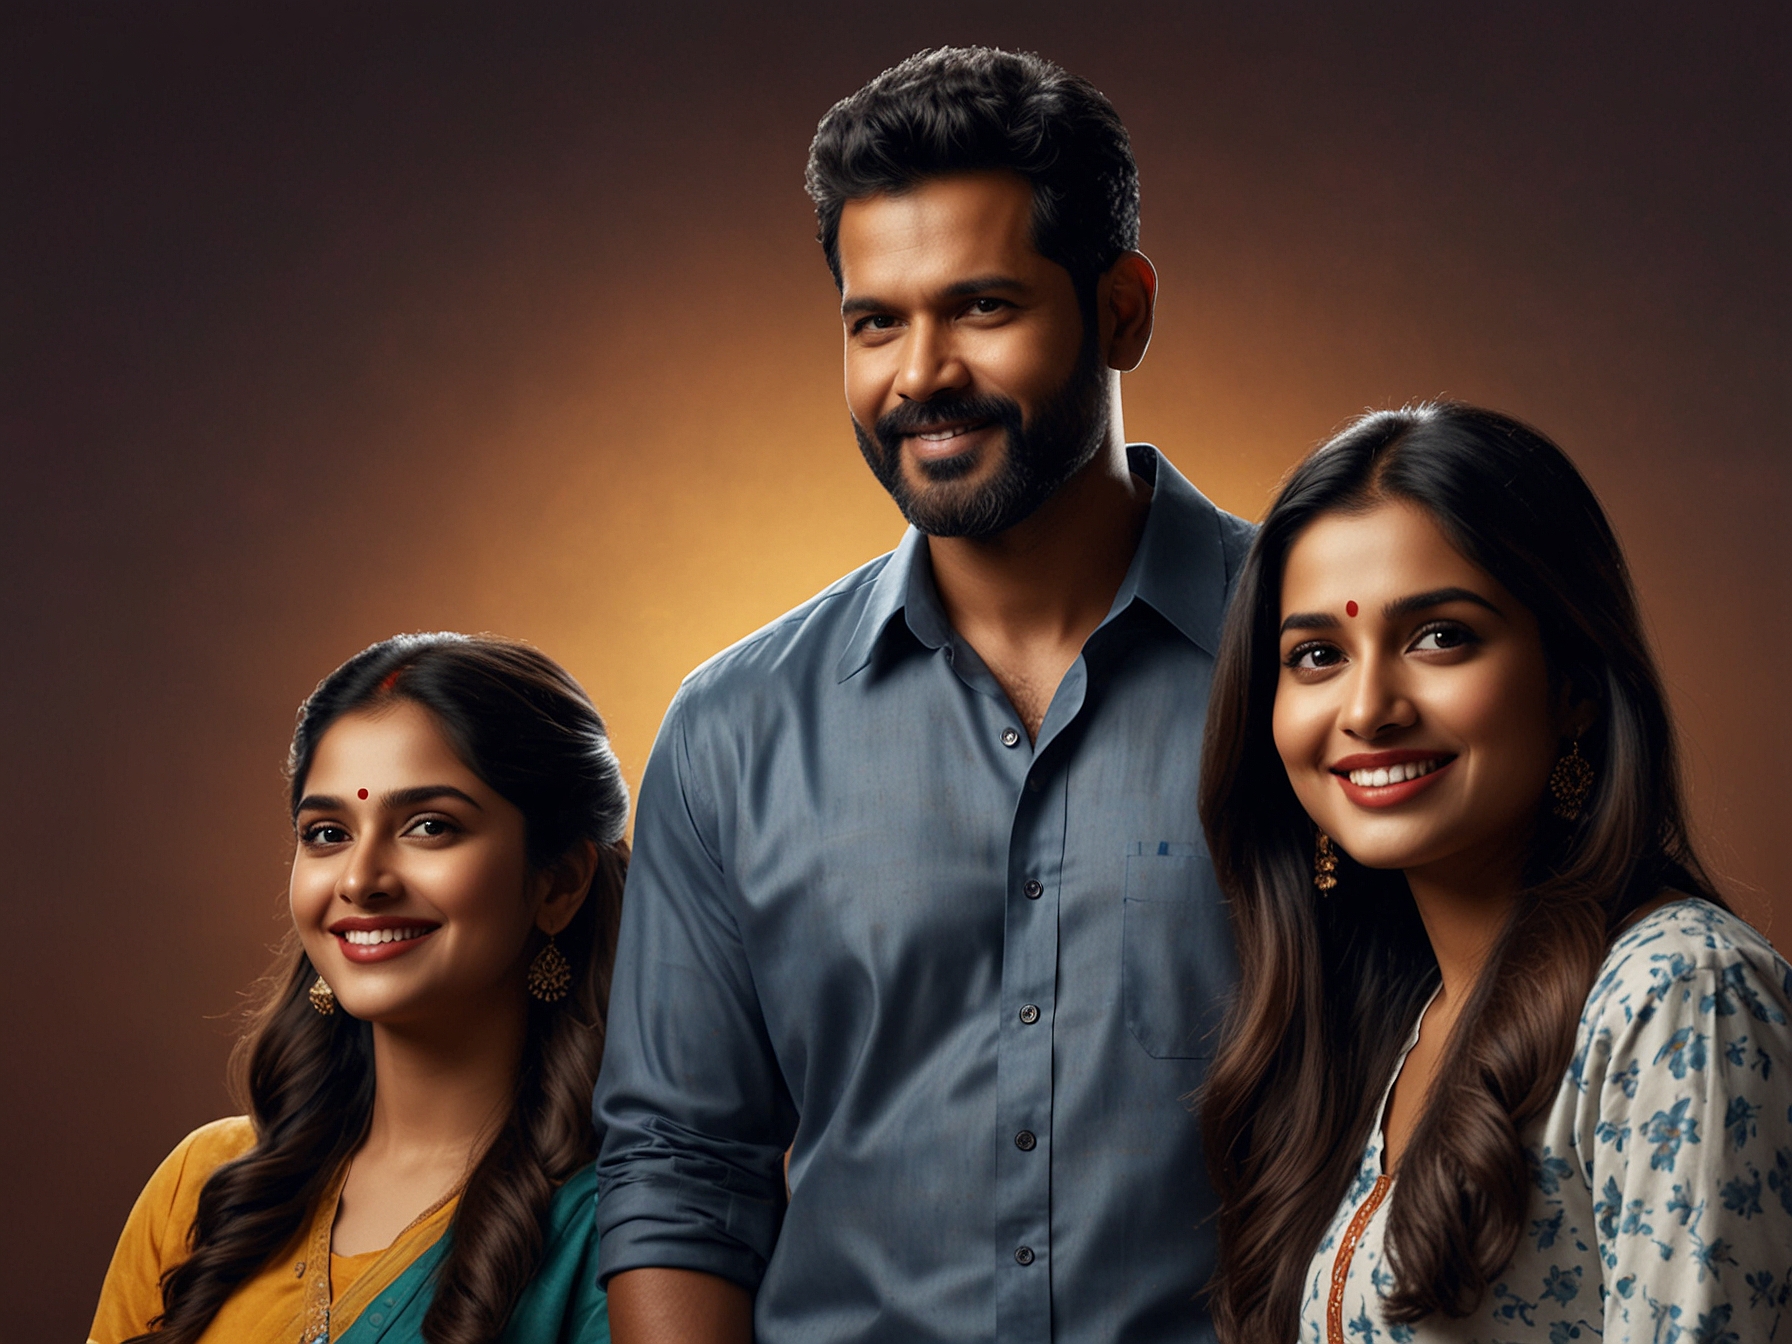 The cast of 'GOAT', including Vijay, Sneha, Meenakshi Chaudhary, and Prabhu Deva, gathered on set, illustrating the star-studded ensemble that enhances the film's excitement.